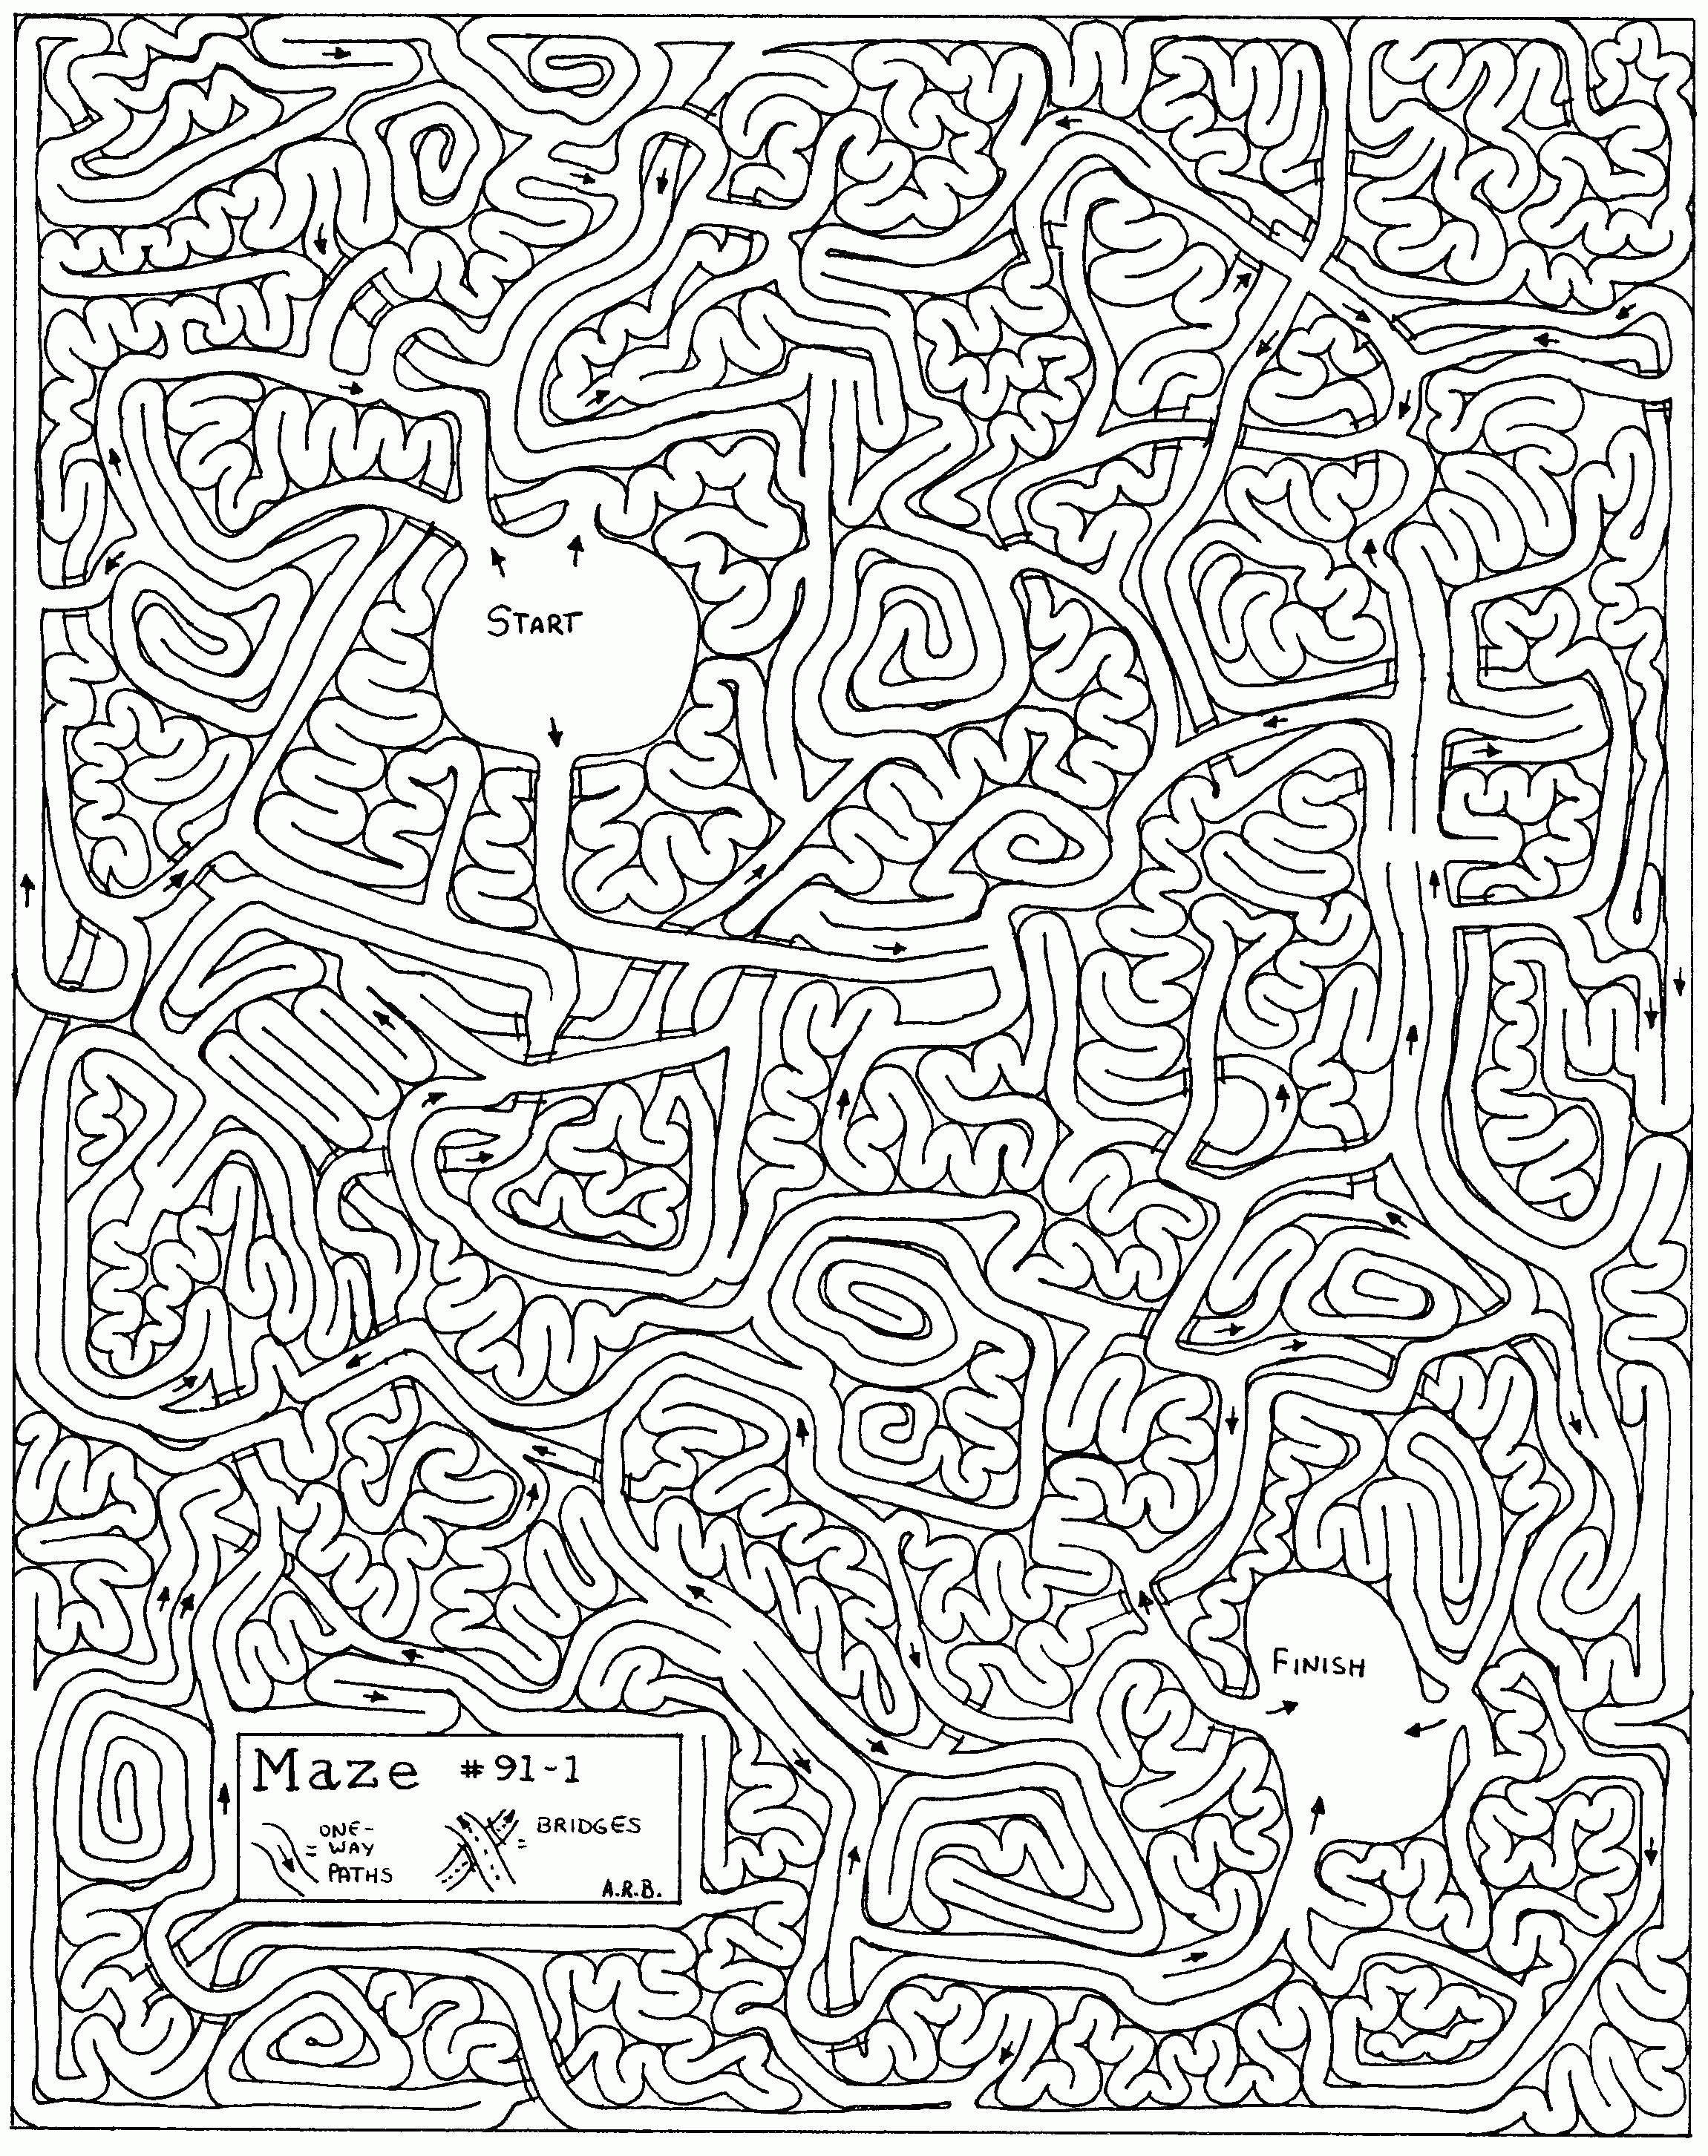 Complicated Coloring Pages For Adults | Andrew Bernhardt&amp;#039;s Mazes - Printable Puzzles And Mazes